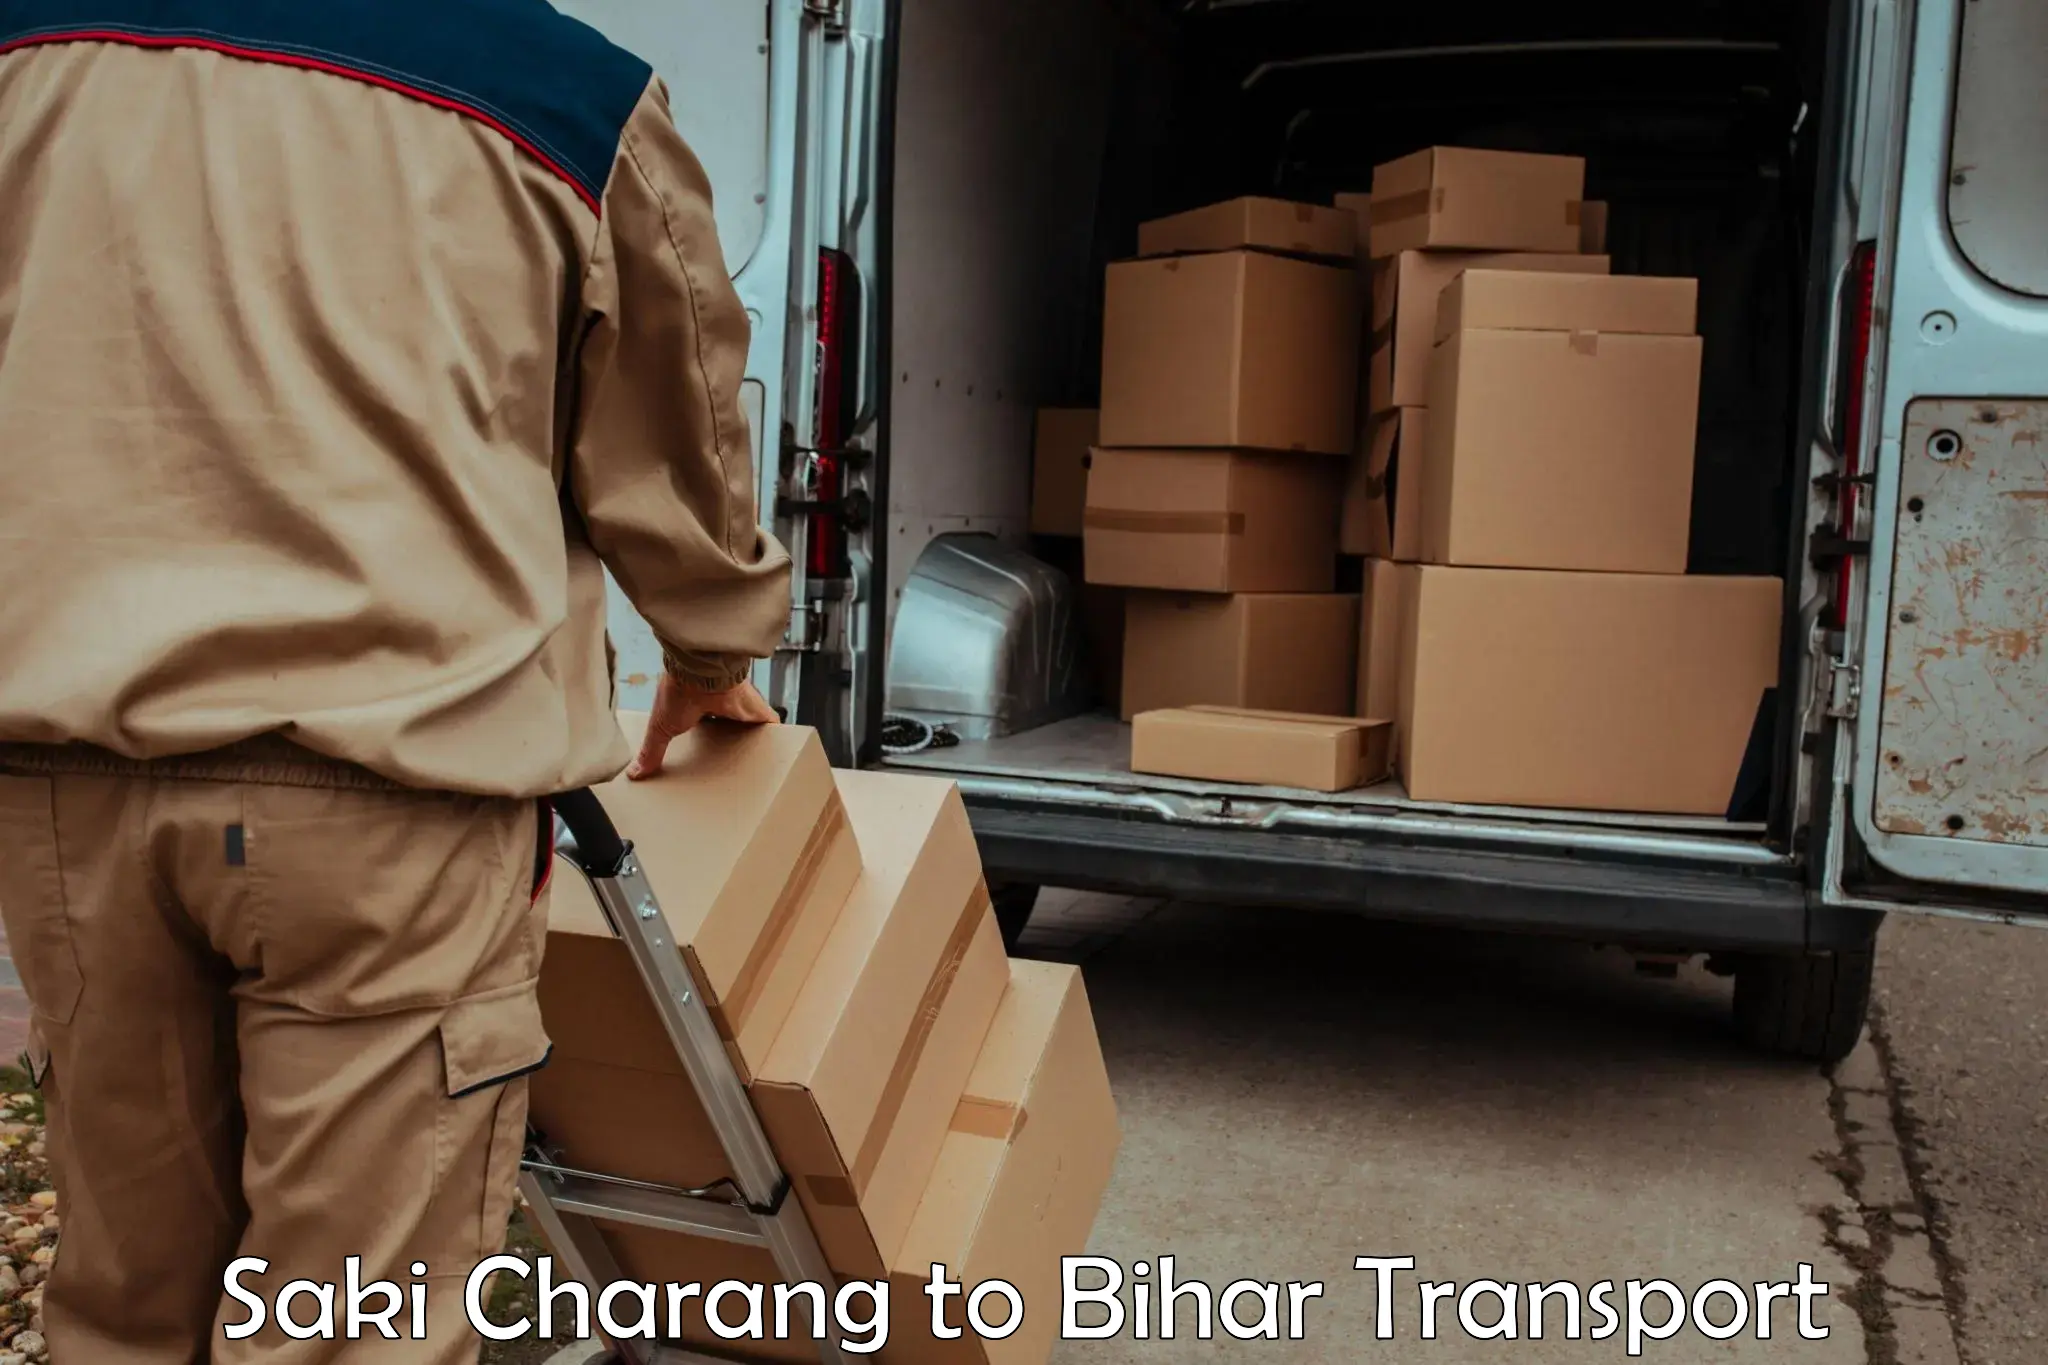 Container transport service Saki Charang to Piro